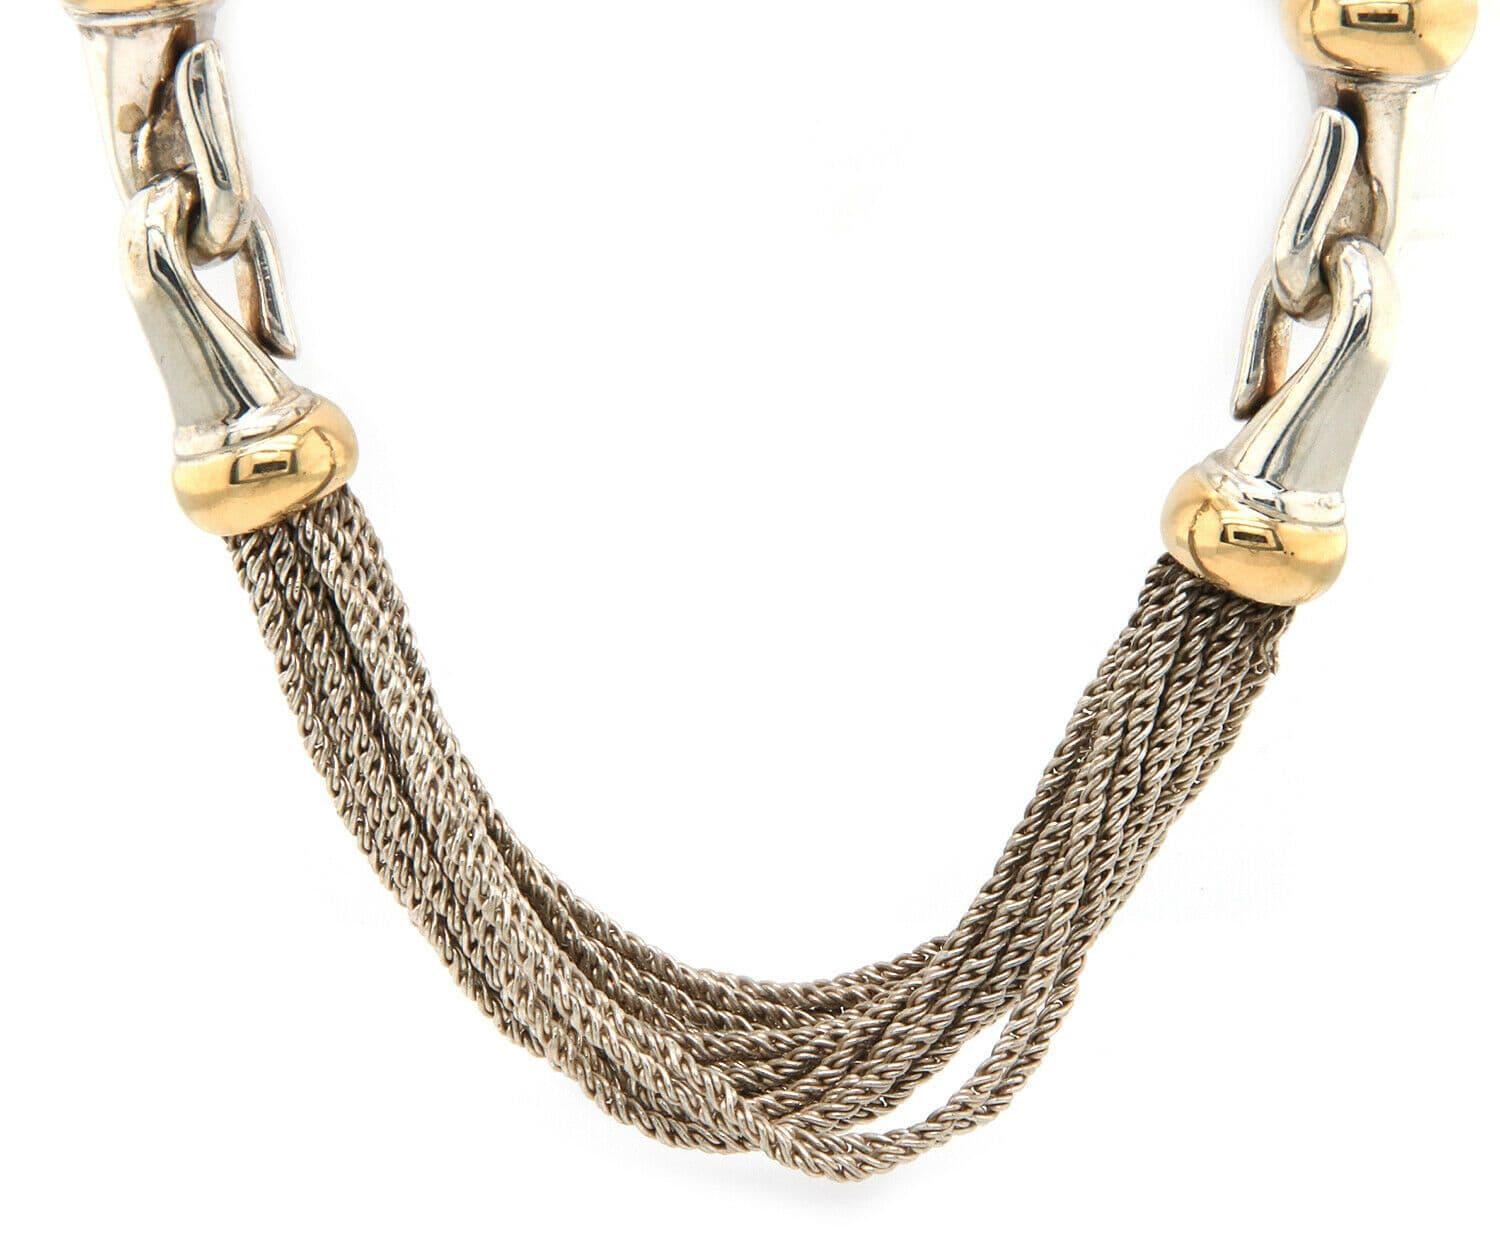 Tiffany & Co. Multi Strand Two Tone Necklace in 18K and Sterling

Tiffany & Co. Multi Strand Two Tone Necklace
18K Yellow Gold
Sterling Silver
Necklace Width: Approx. 10.0 – 12.0 MM
Necklace Length: Approx. 16.5 Inches
Weight: Approx. 100.50